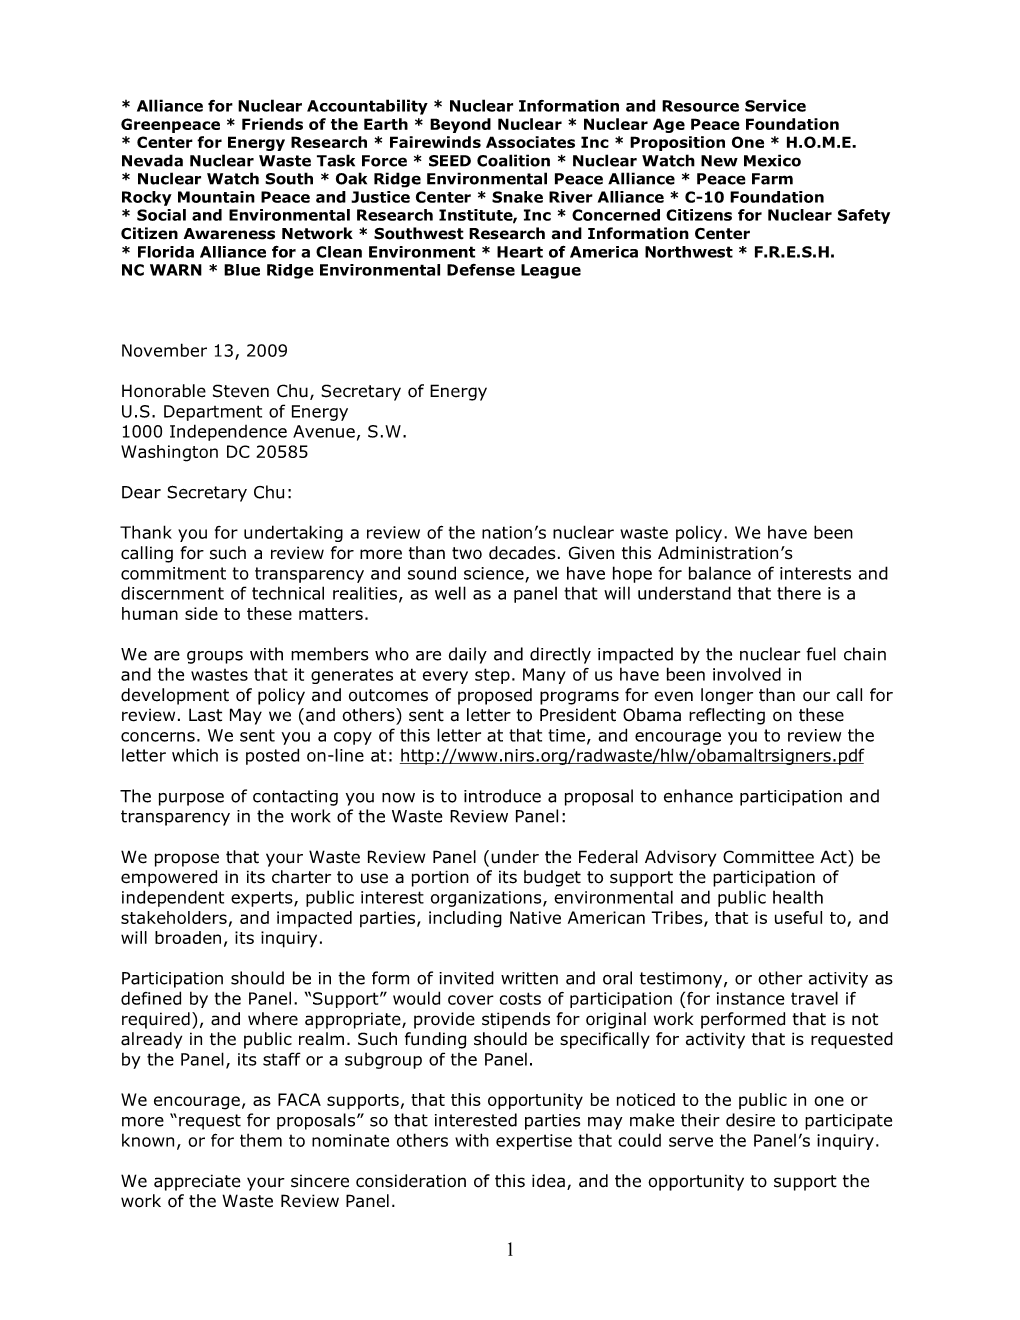 Letter to Secretary Chu Calling for Inclusion of Independent Experts